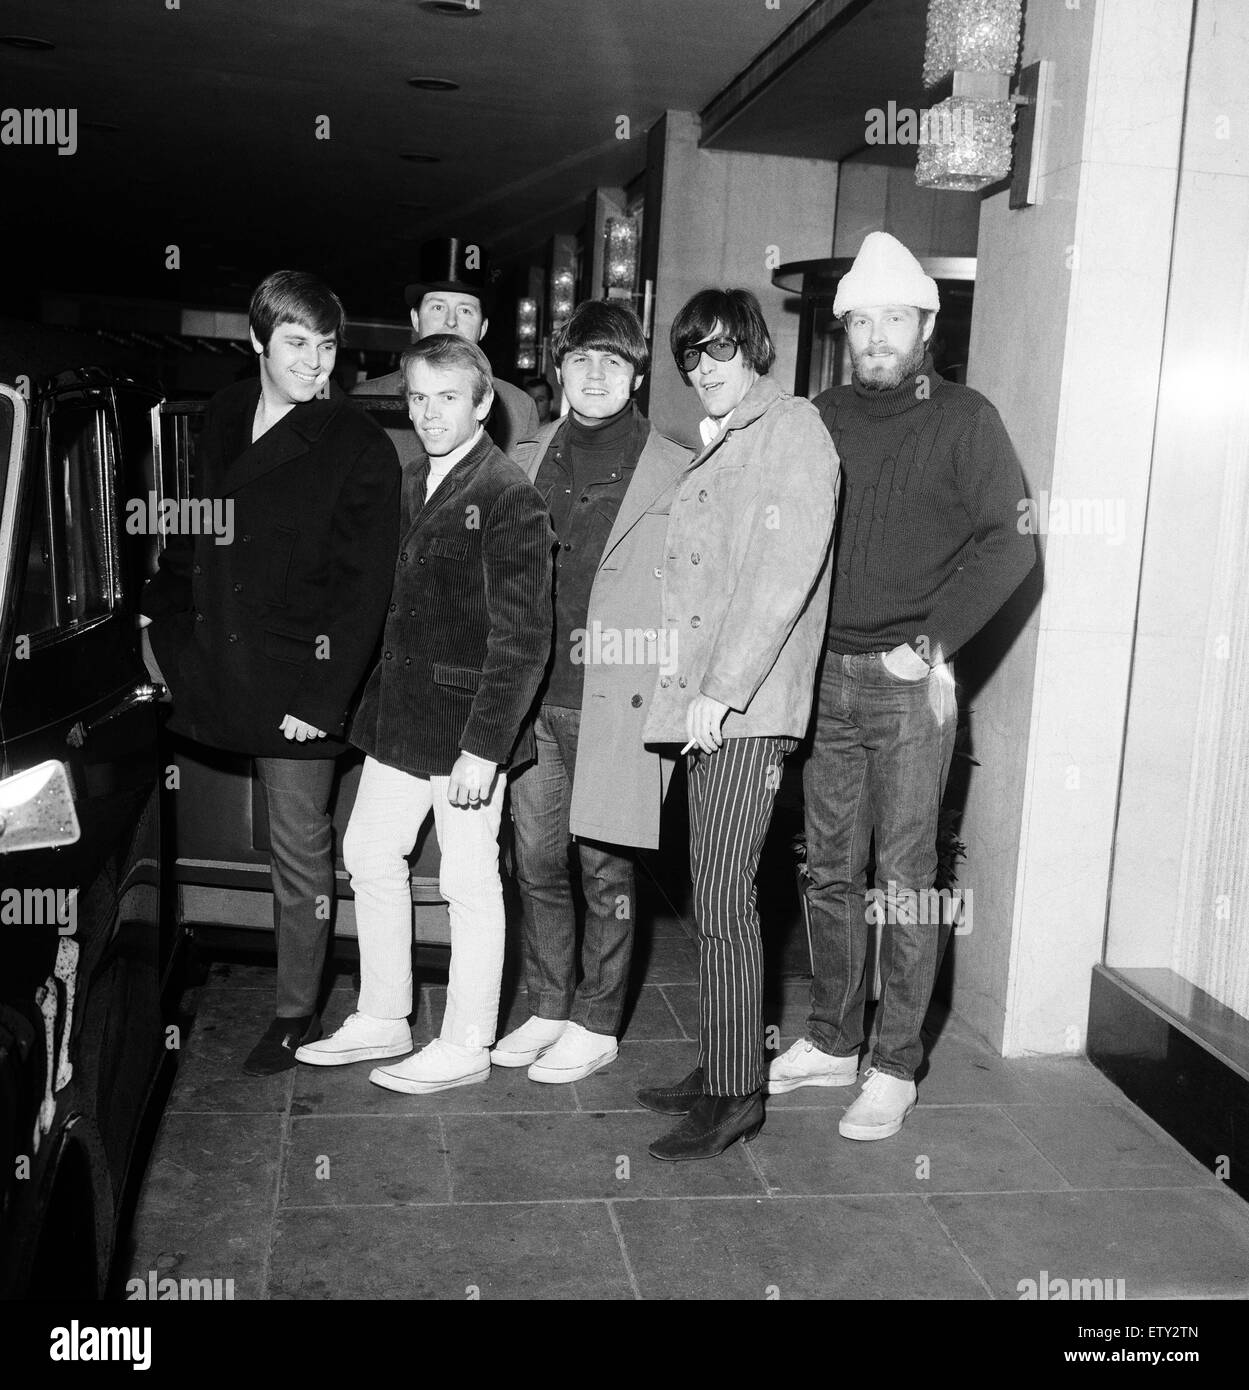 The Beach boys, Carl Wilson, Al Jardine, Bruce Johnston, Dennis Wilson and Mike Love, arrived in London yesterday for a week's tour. Carl Wilson was reported last week to have been refused permission to visit Britian because he was accused of failing to r Stock Photo